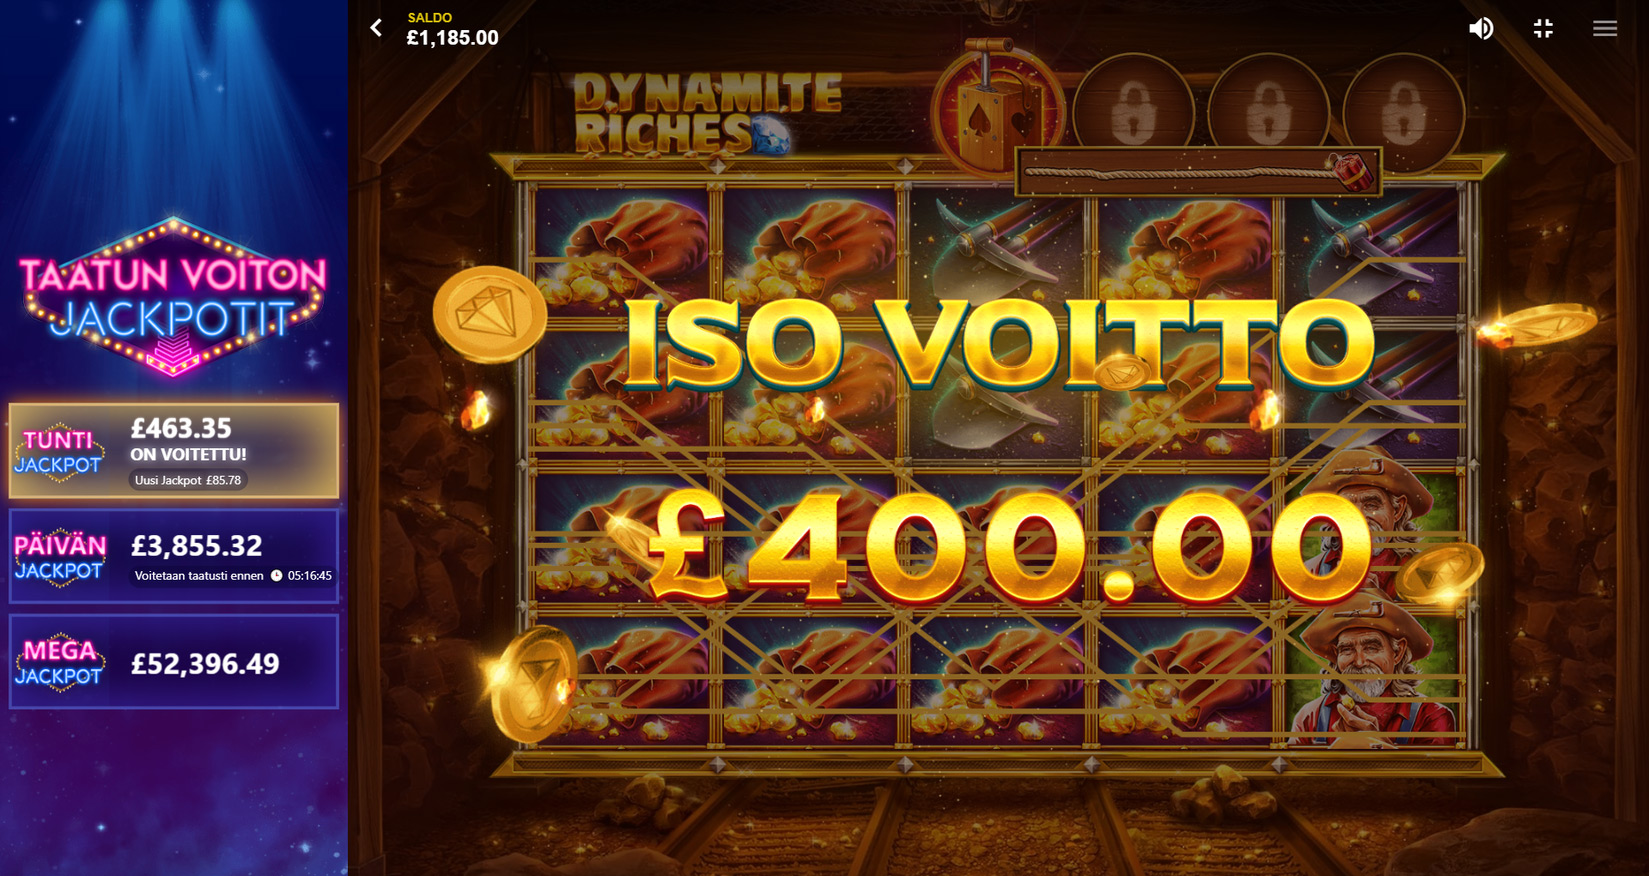 Dynamite riches jackpot results